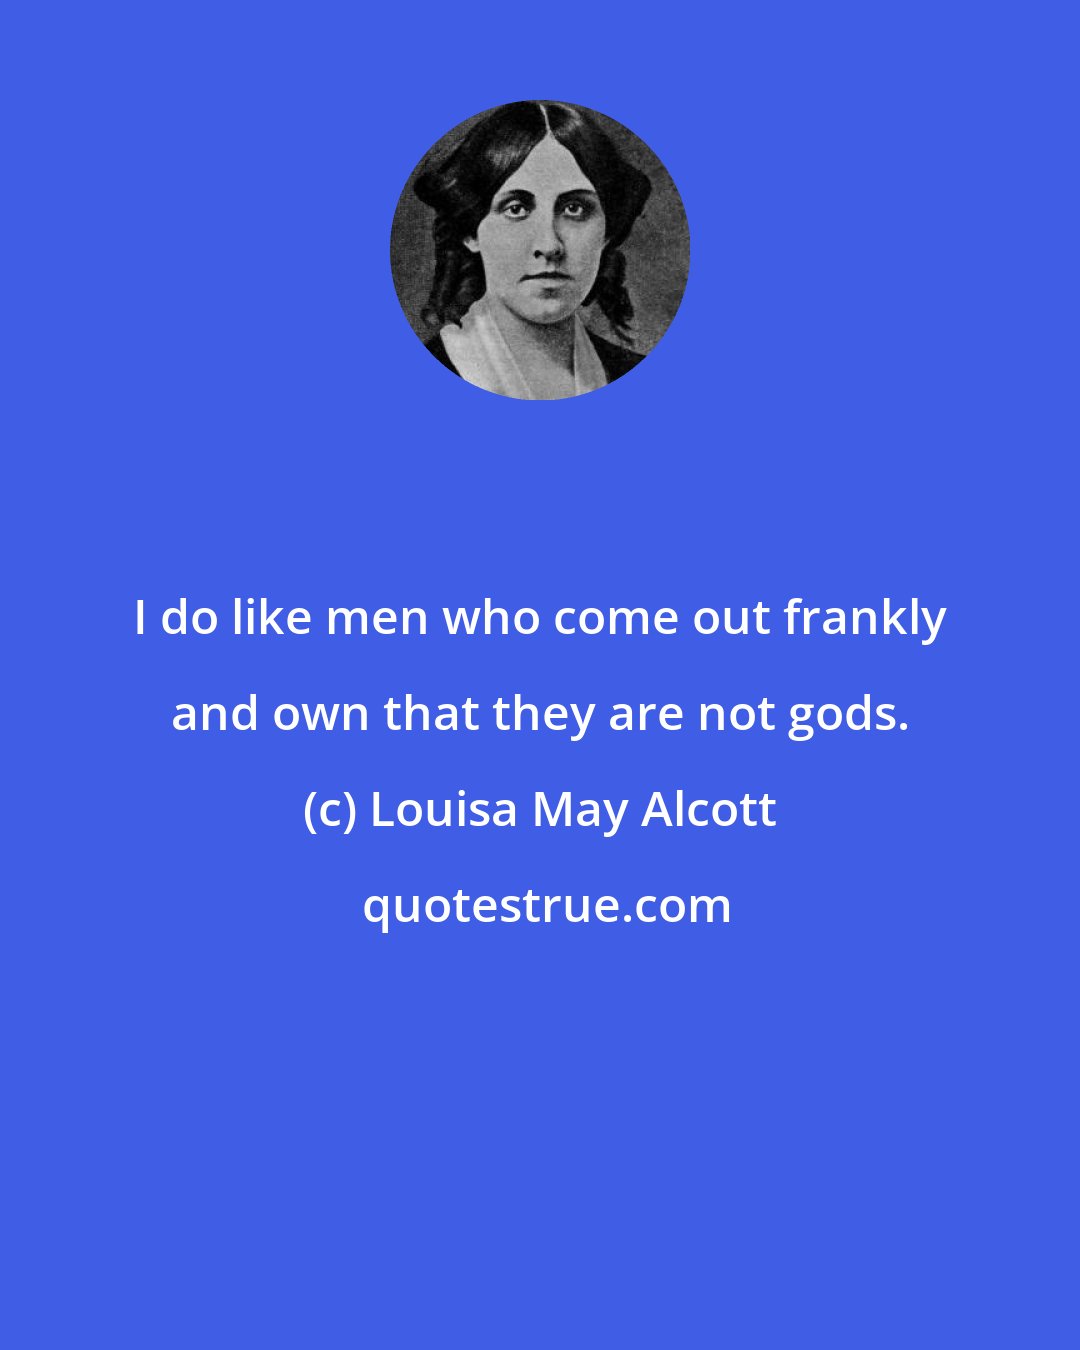 Louisa May Alcott: I do like men who come out frankly and own that they are not gods.